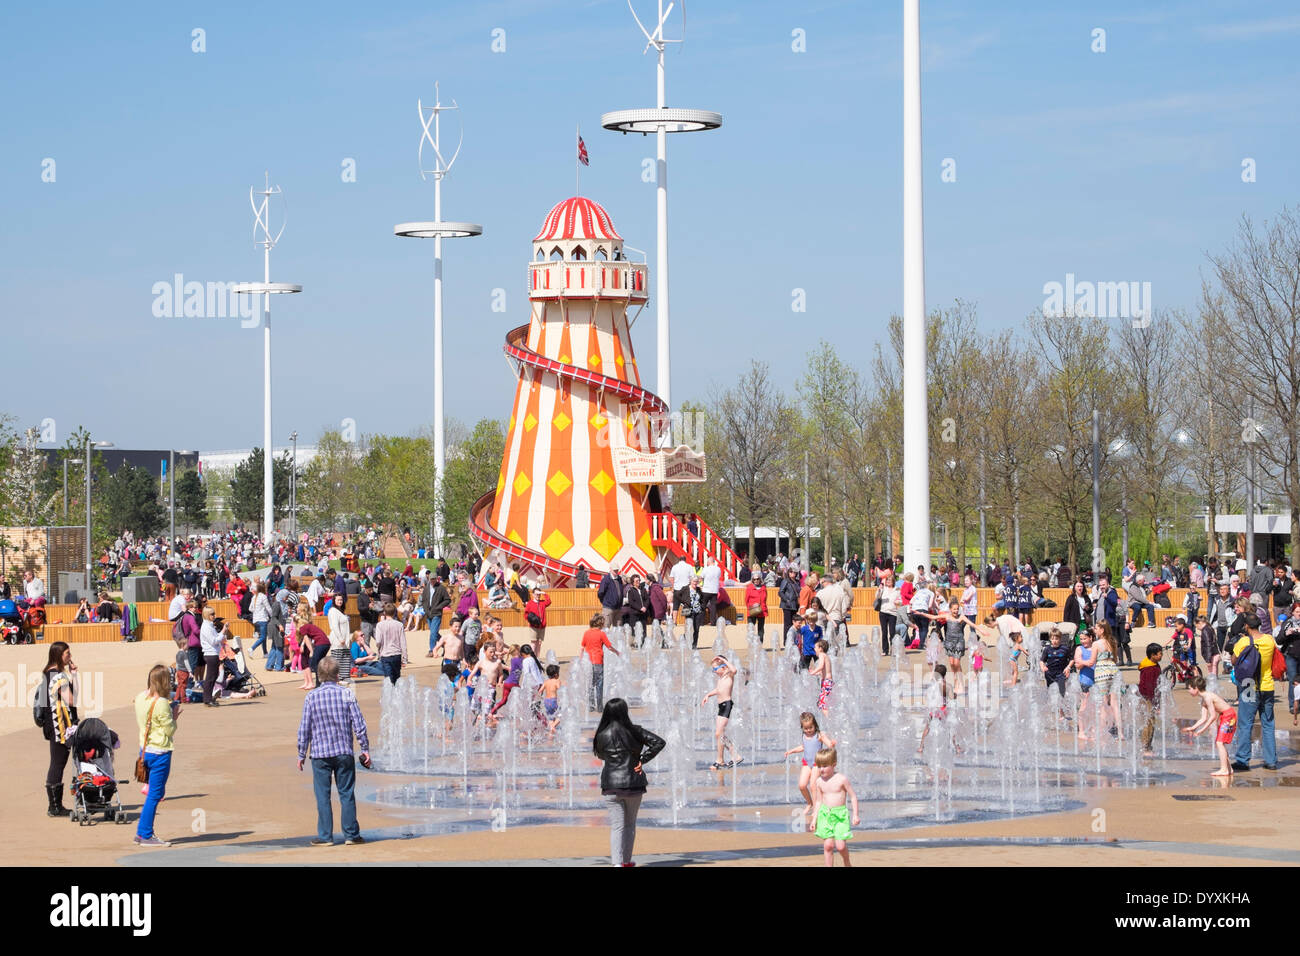 Helter Skelter funfair and fountain with many visitors at Queen Elizabeth Olympic Park in Stratford London United Kingdom Stock Photo